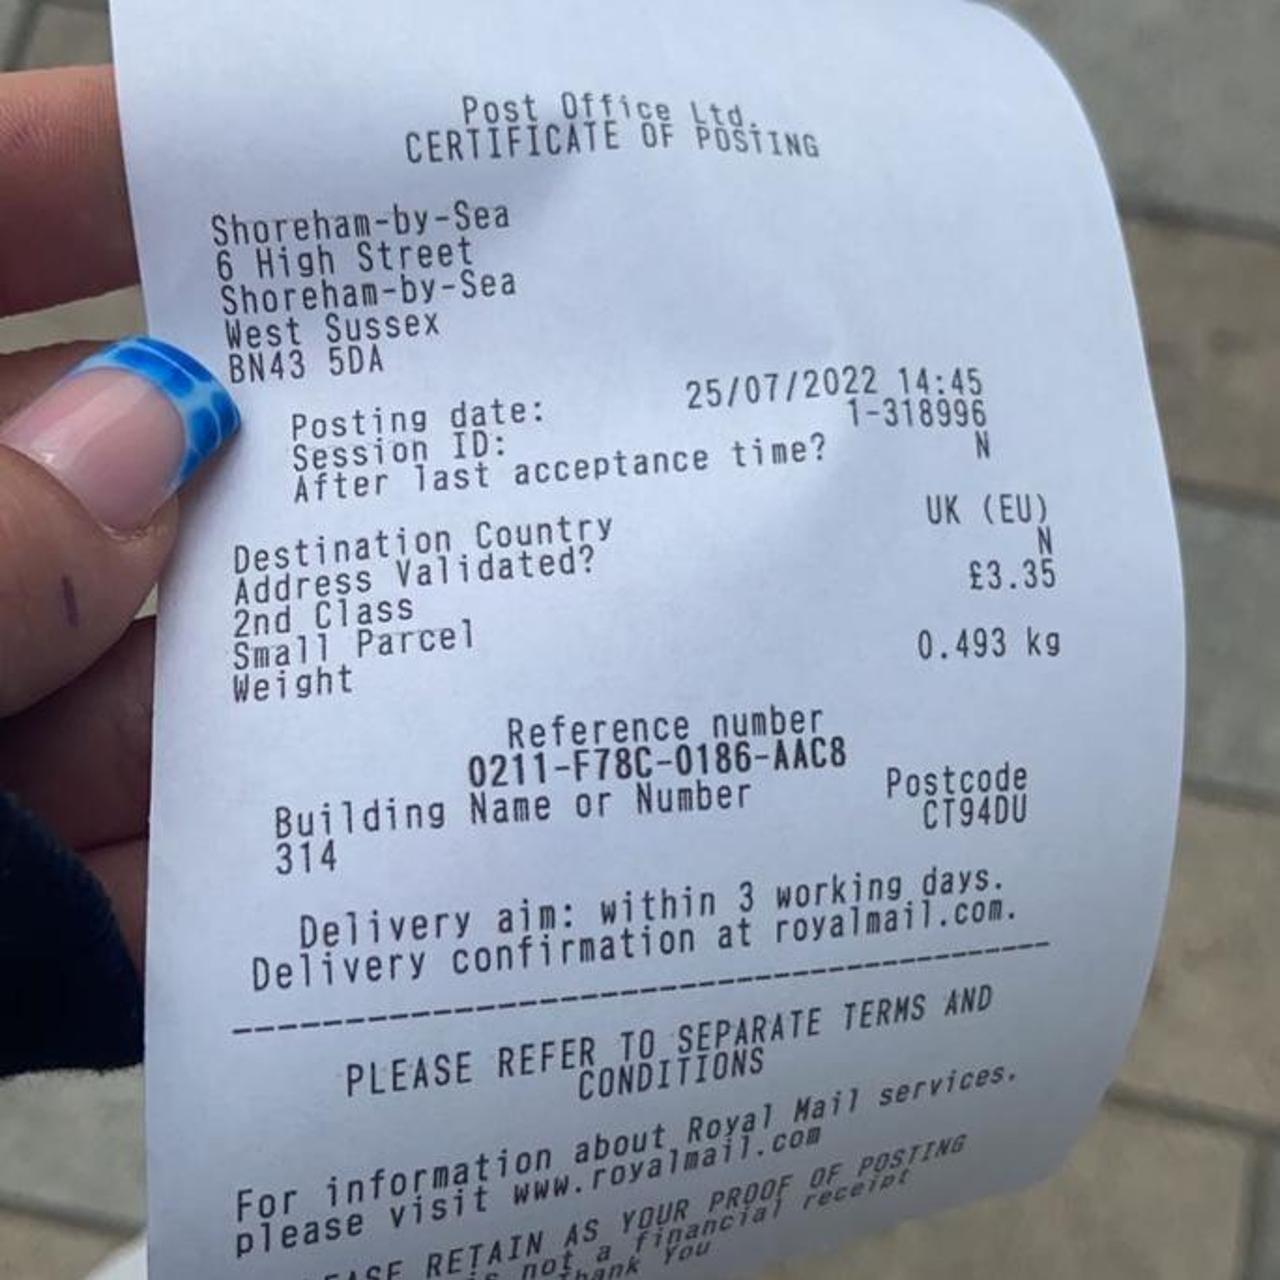 mitch9417 there's my receipt mate - Depop